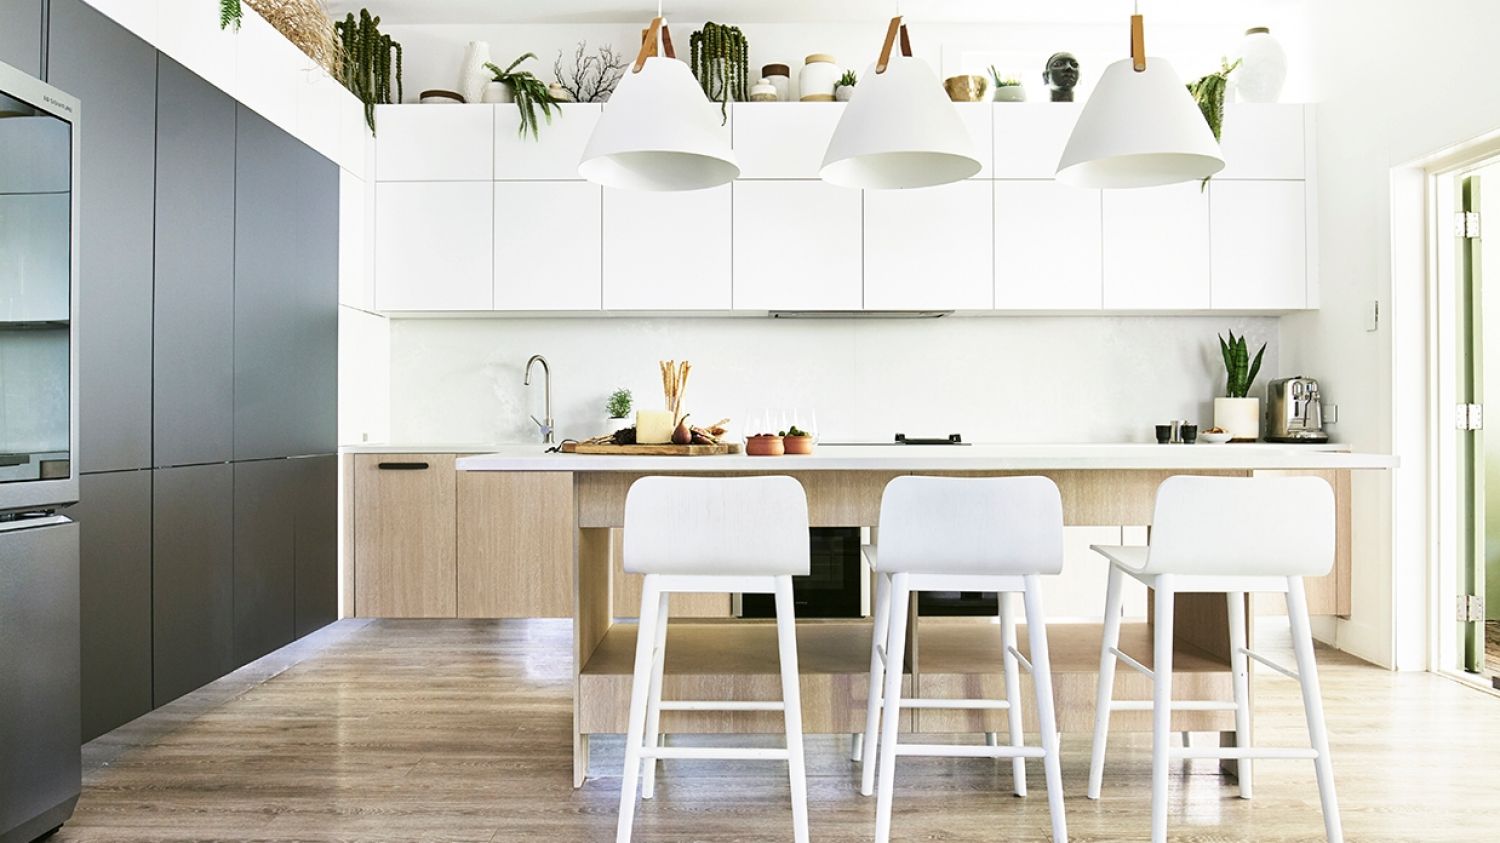 The heart of his home: A look inside Darren Palmer’s kitchen